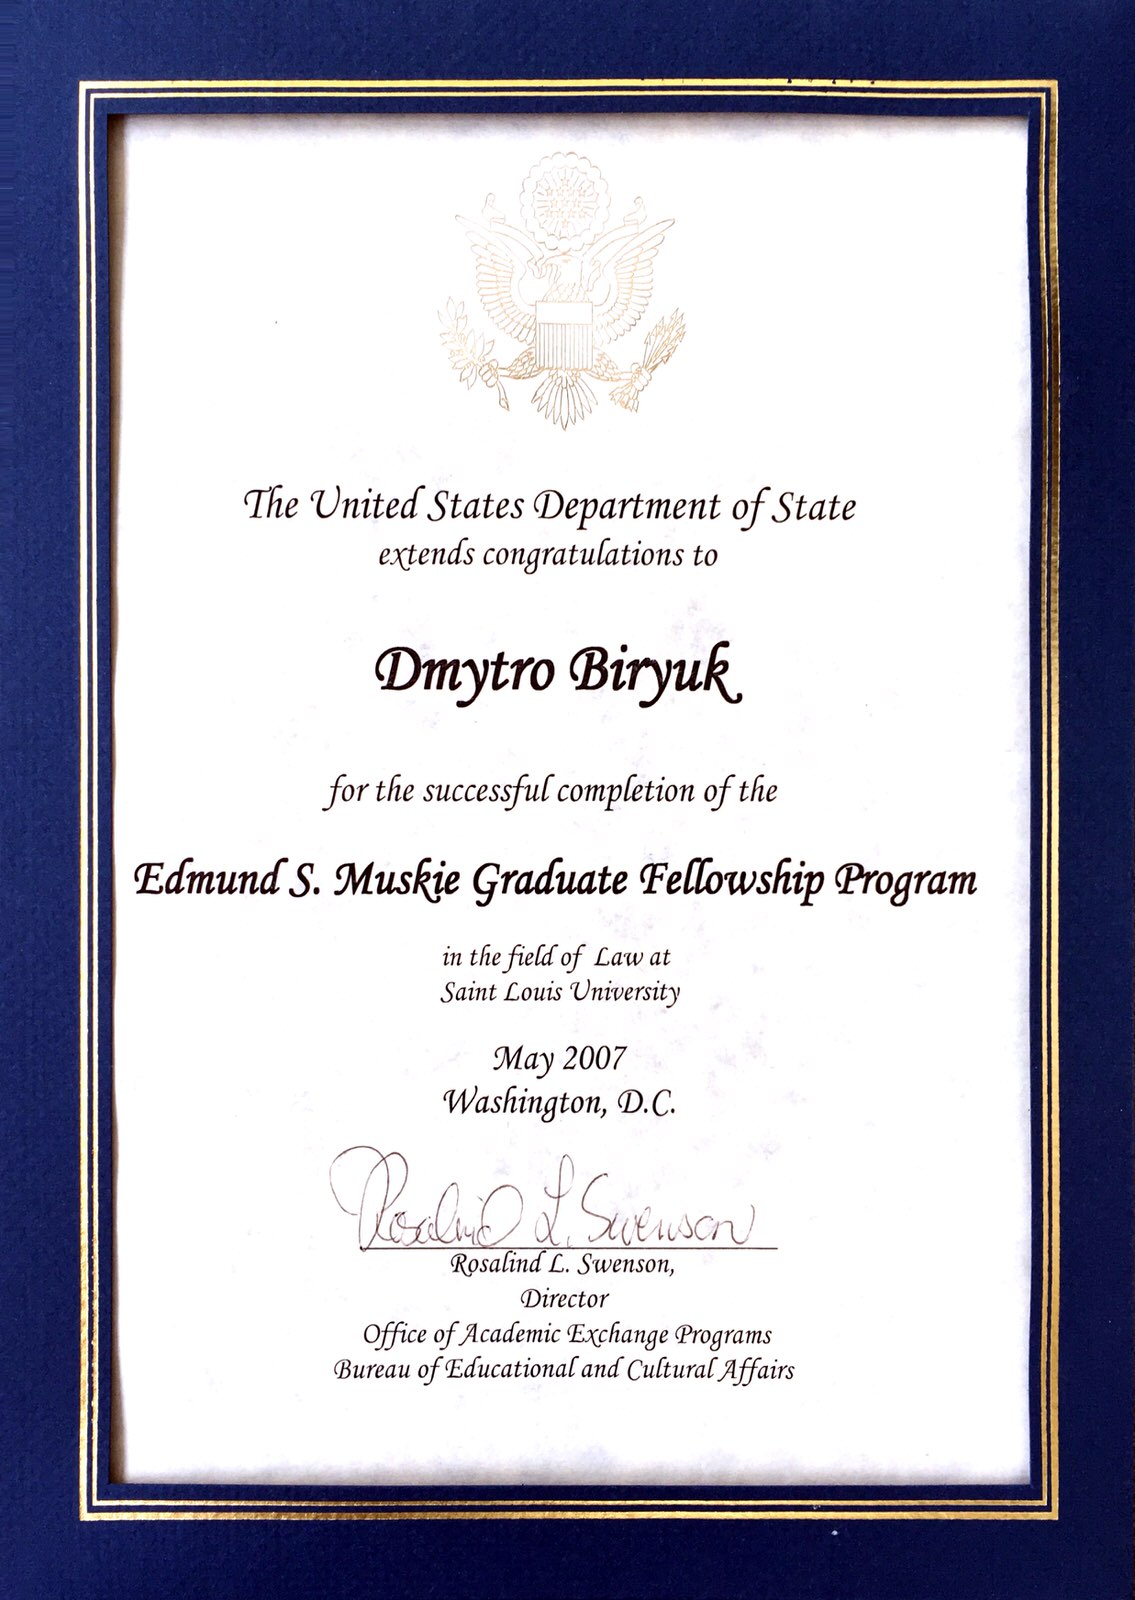 Photo of US Department of State Certificate on Successful Completion of the Edmund S. Muskie Graduate Program (LLM)